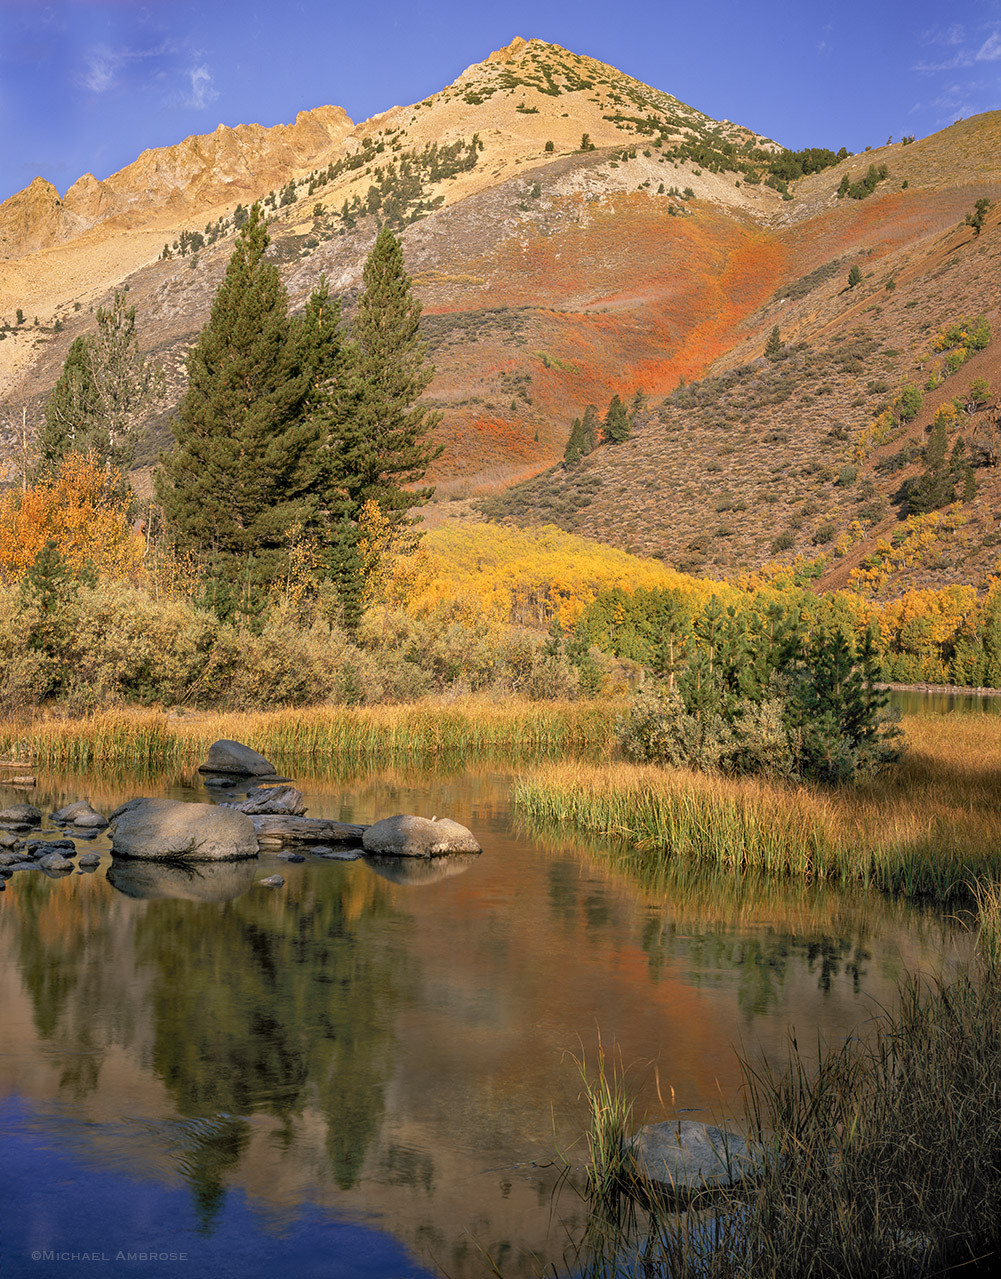 Autumn color decorates the hills near North Lake in the Eastern Sierra, California